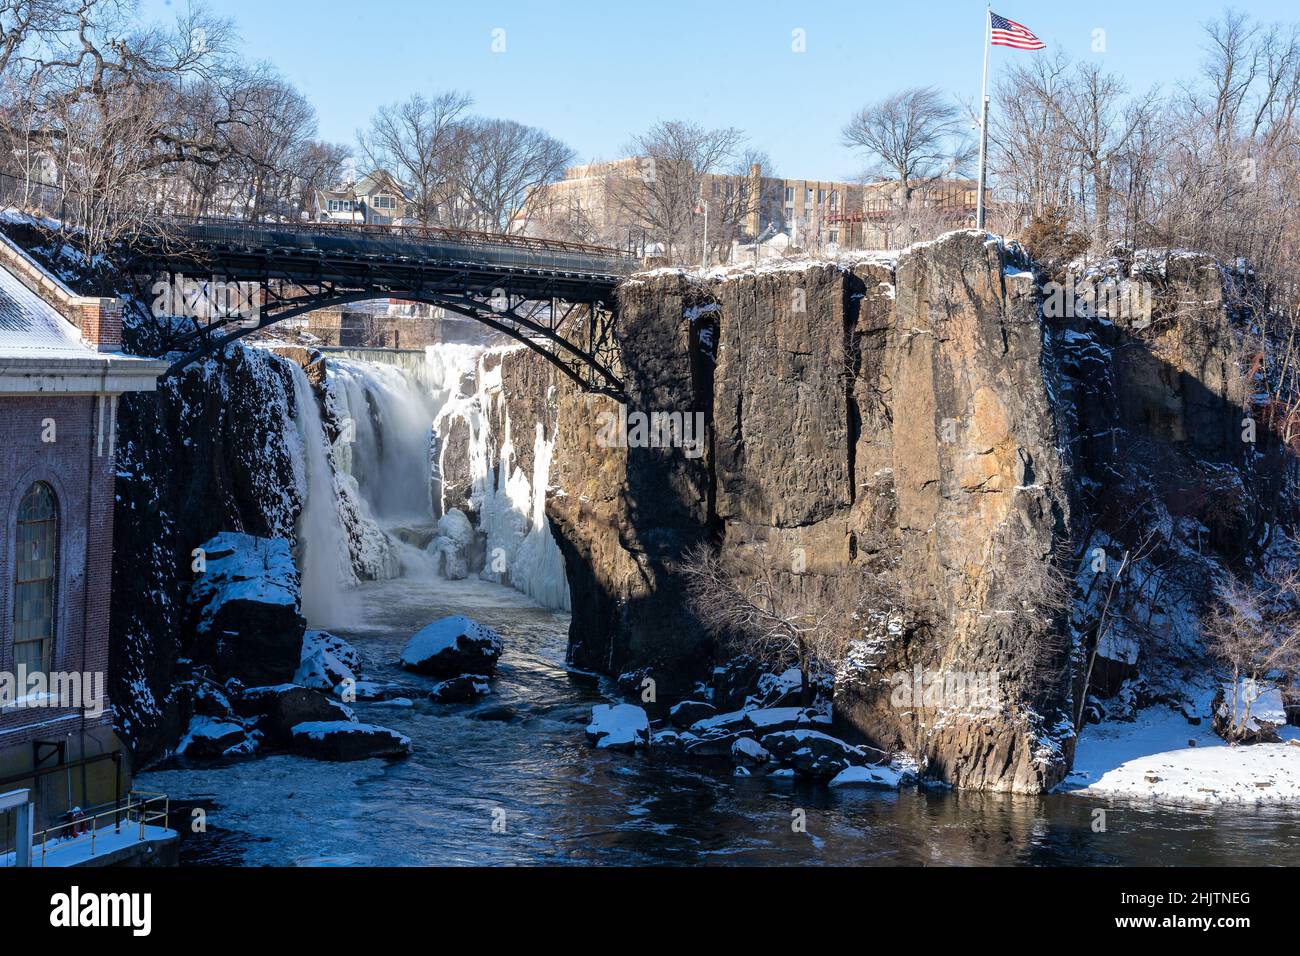 Paterson, NJ - USA - Jan 30, 2022 Horizontal view of the partially frozen falls at the historic Paterson Great Falls National Historical Park during t Stock Photo